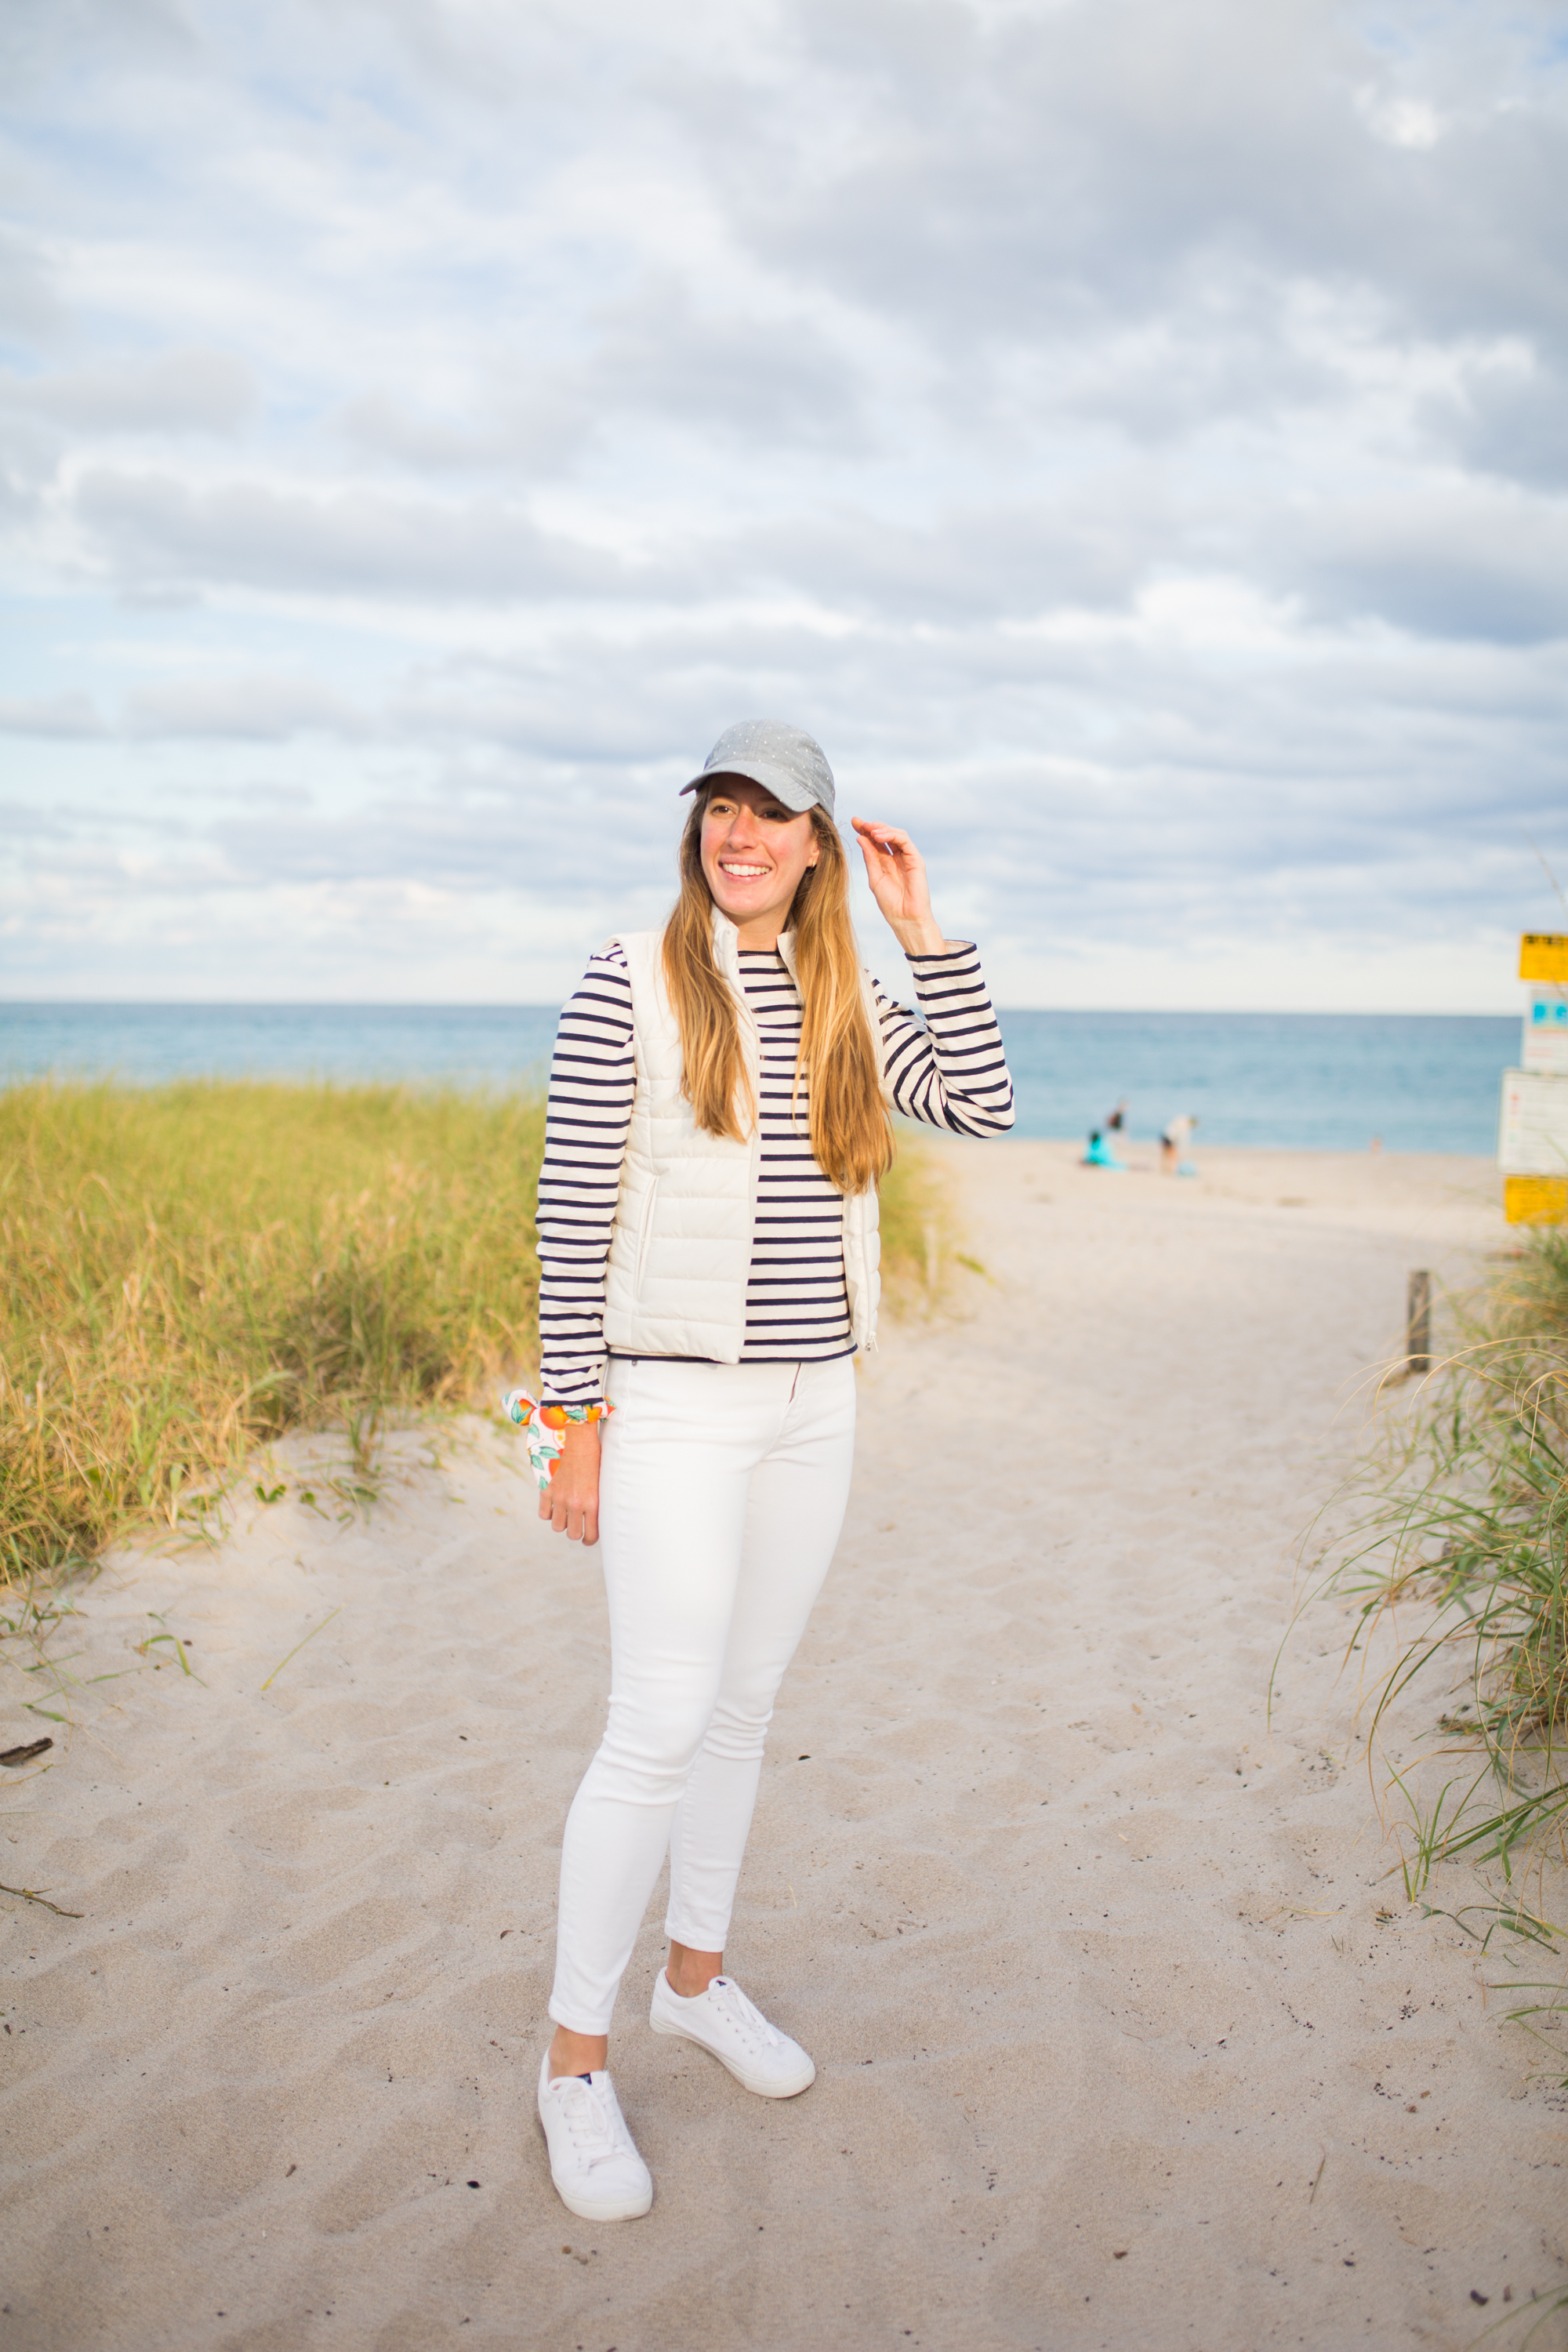 Saint James Breton Striped Shirt / American Style / Classic Style / Casual Outfit / Palm Beach Florida / How to Wear a Striped Top / White Jeans / Beach Style / Beach Outfit - Sunshine Style, A Florida Based Fashion Blog by Katie 